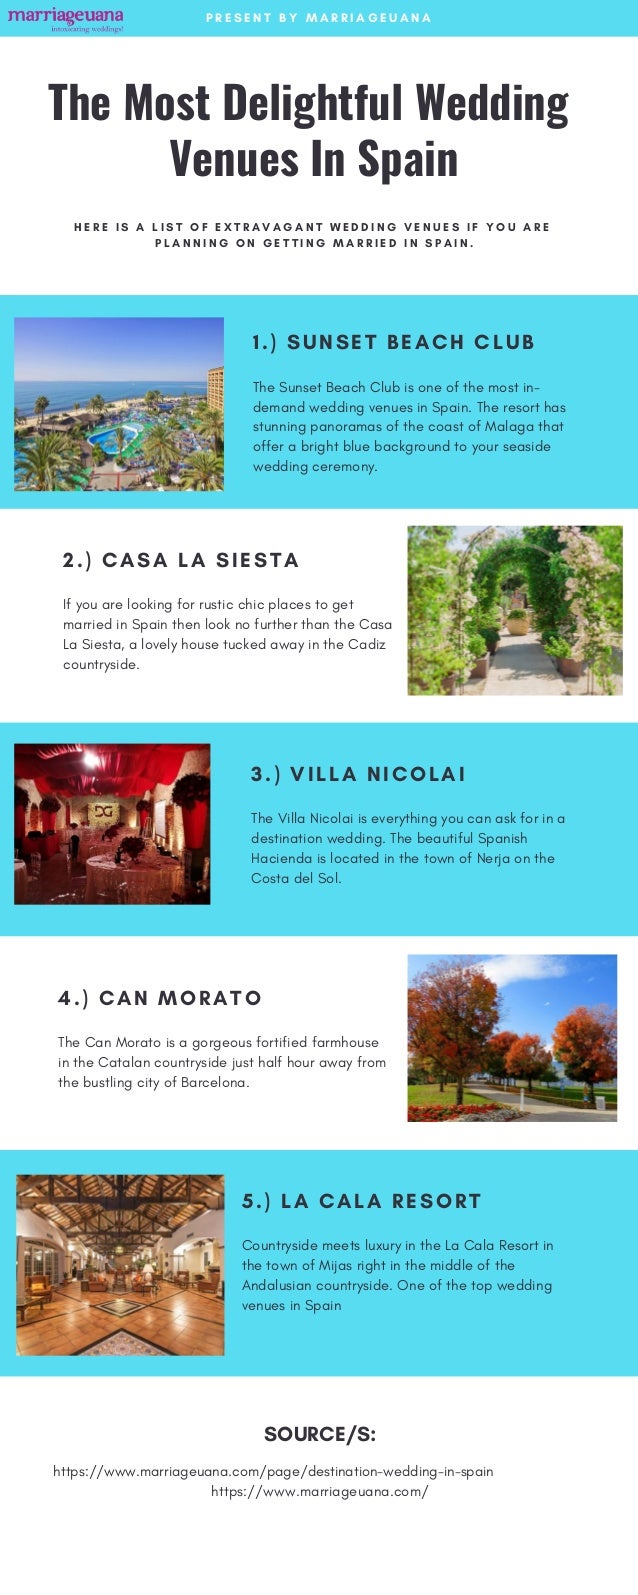 The Most Delightful Wedding Venues In Spain